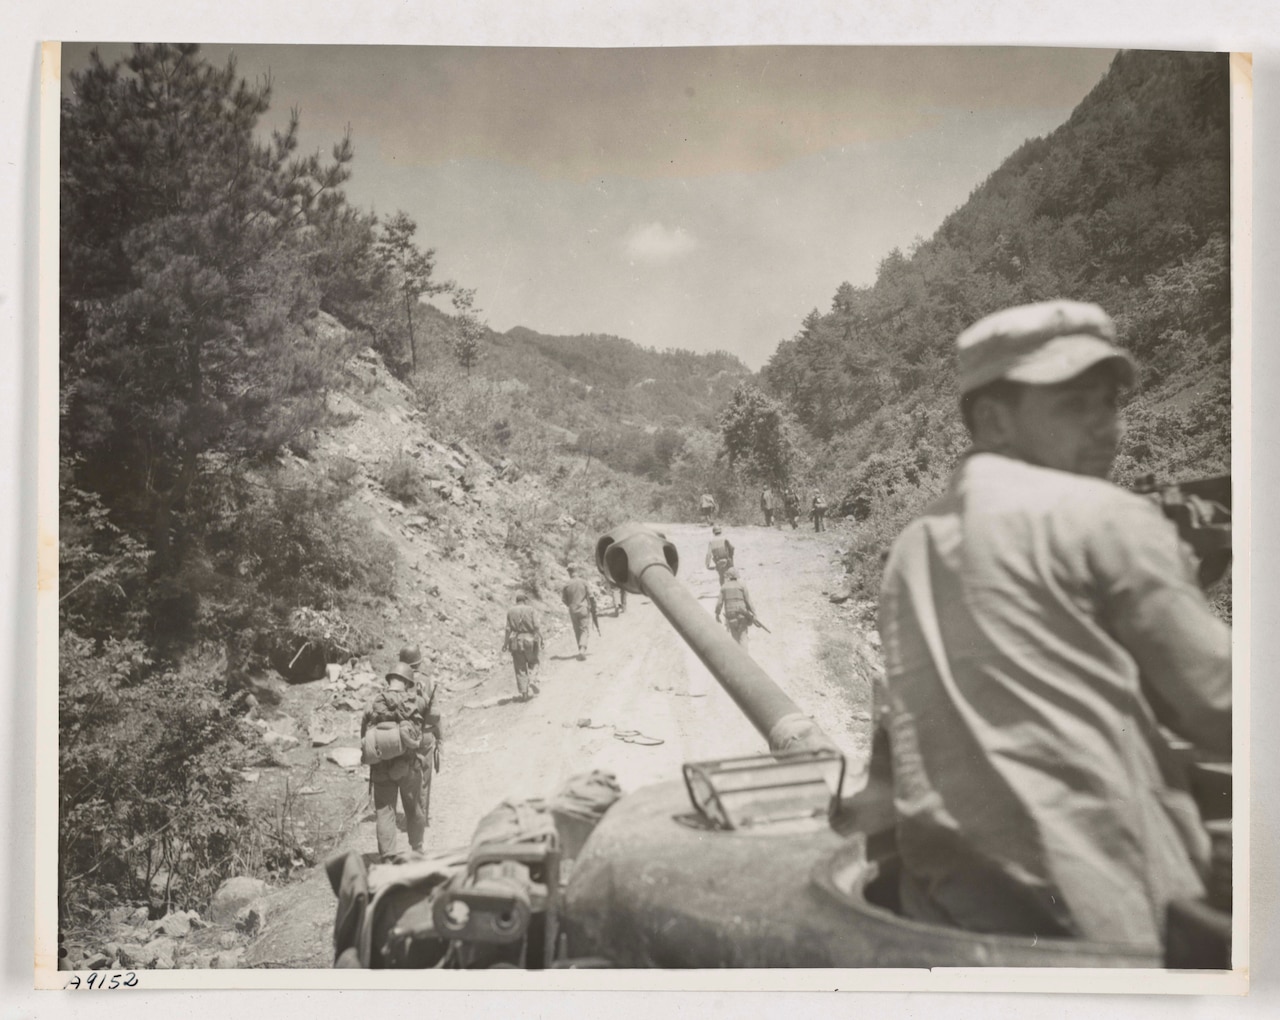 A man emerging from the top of a tank looks over his shoulder. Marines walk on the road ahead of the tank.